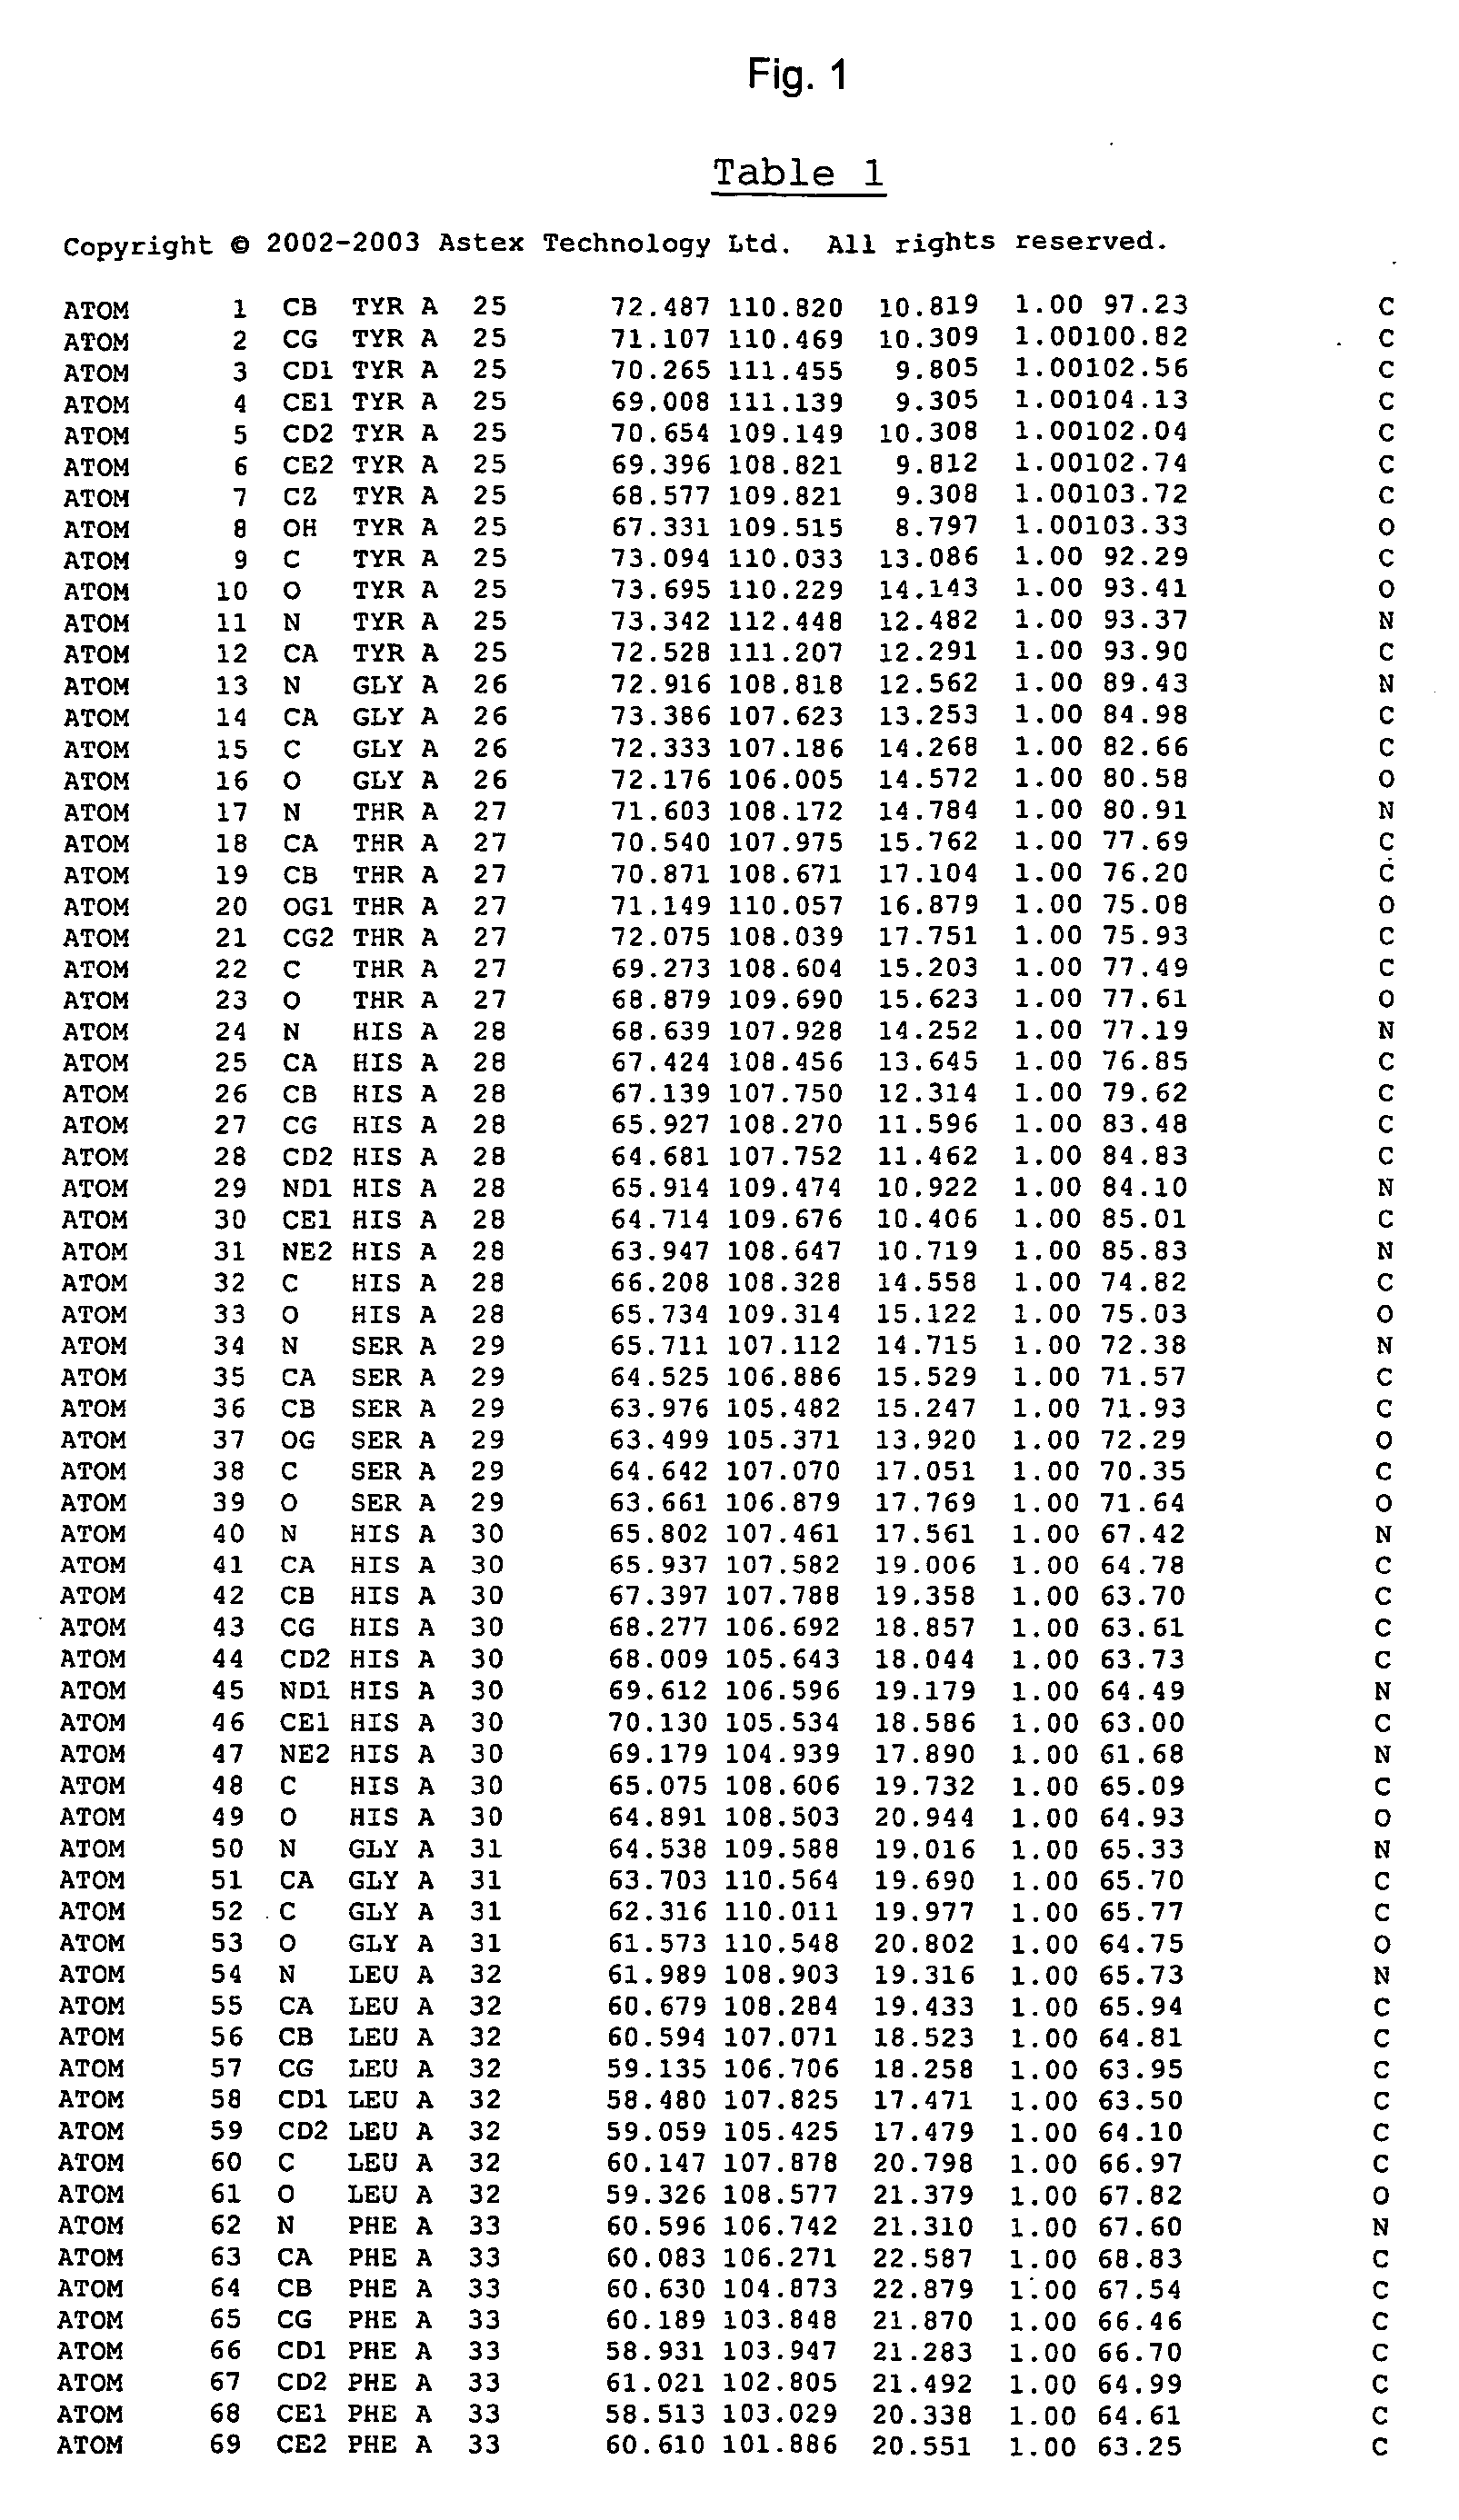 Crystal structure of cytochrome P450 3A4 and uses thereof